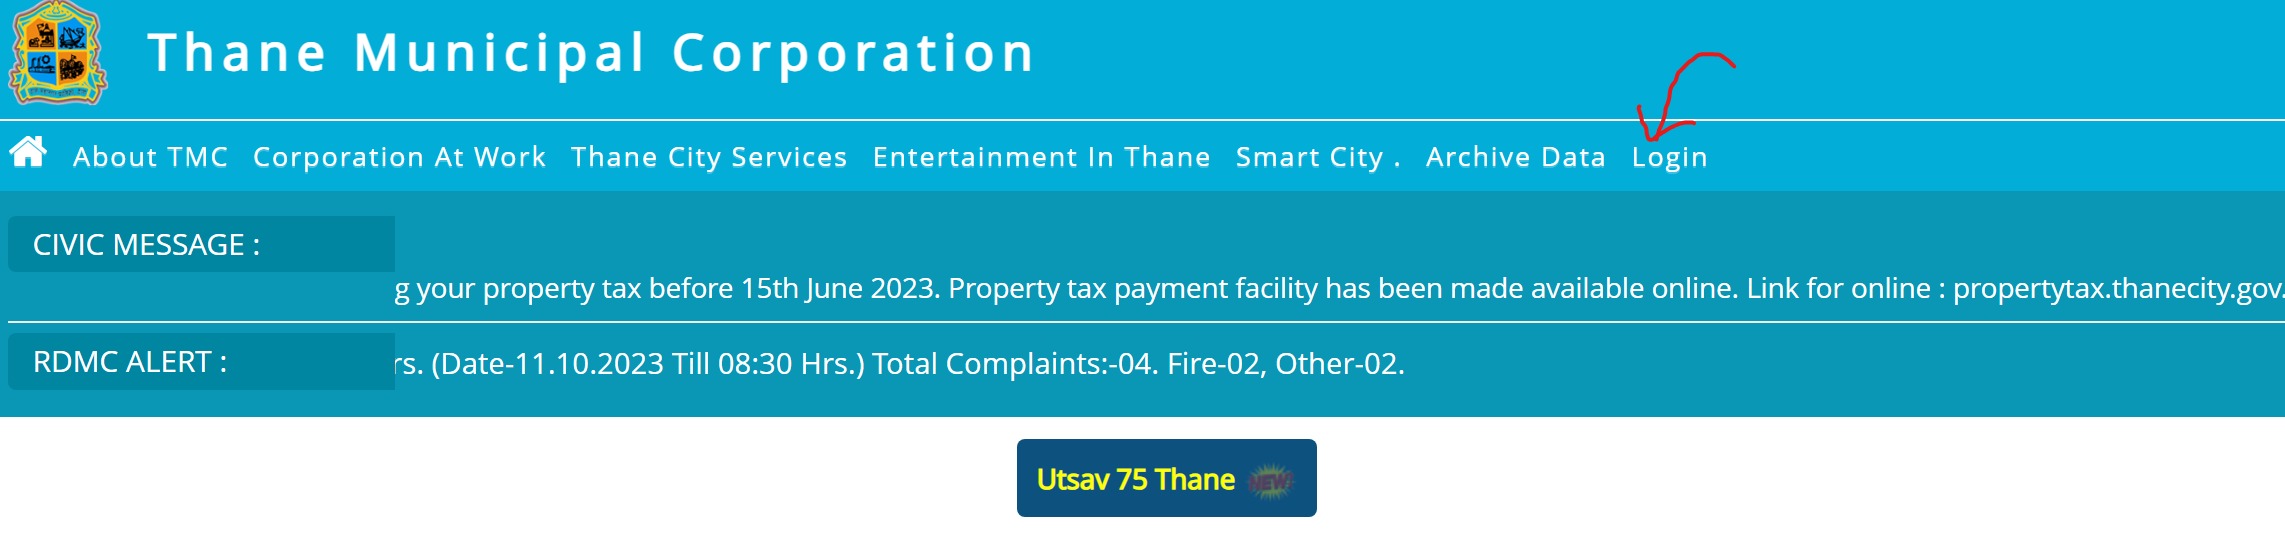 Guide to register a complaint online with Thane Municipal Corporation